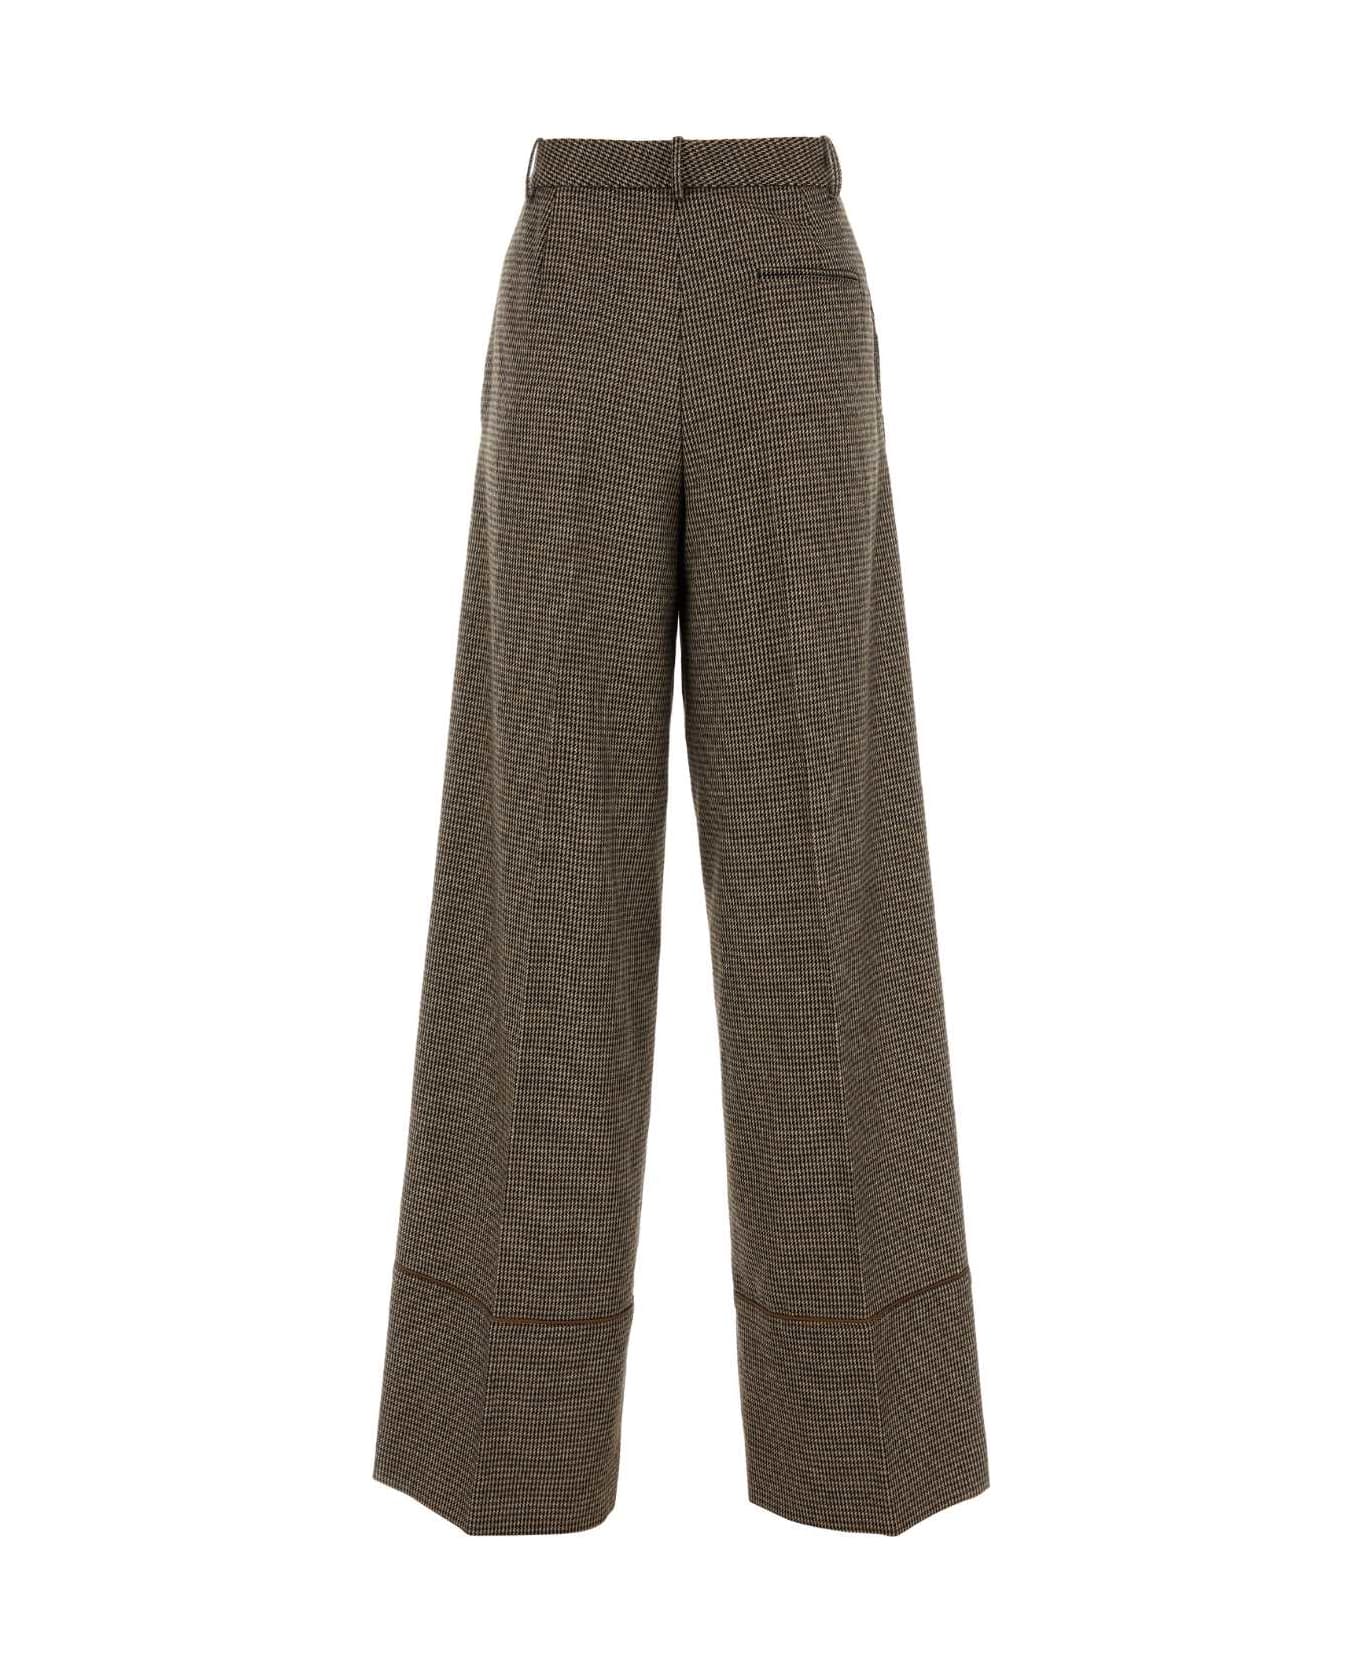 Bally Embroidered Stretch Wool Blend Wide-leg Pant - I8D5 ボトムス